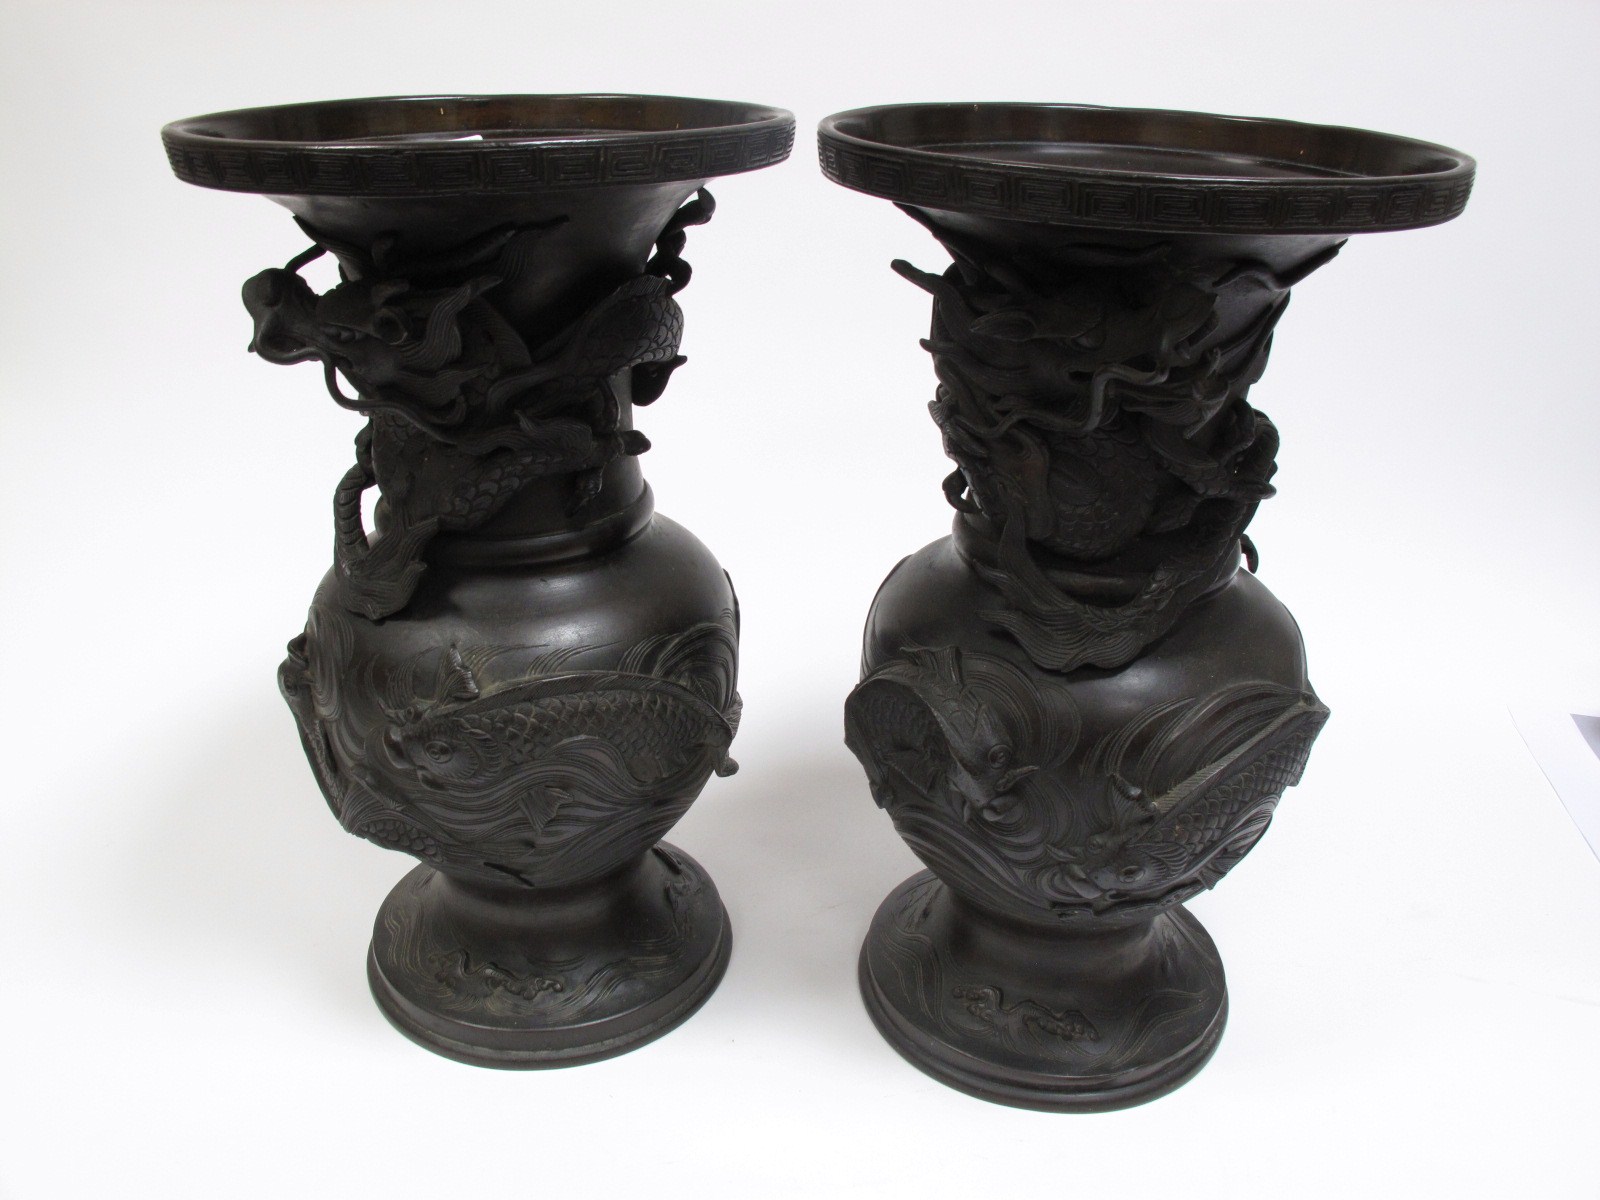 A Pair of Late XIX Century Japanese Cast Bronze Vases, of baluster pedestal form, relief decorated